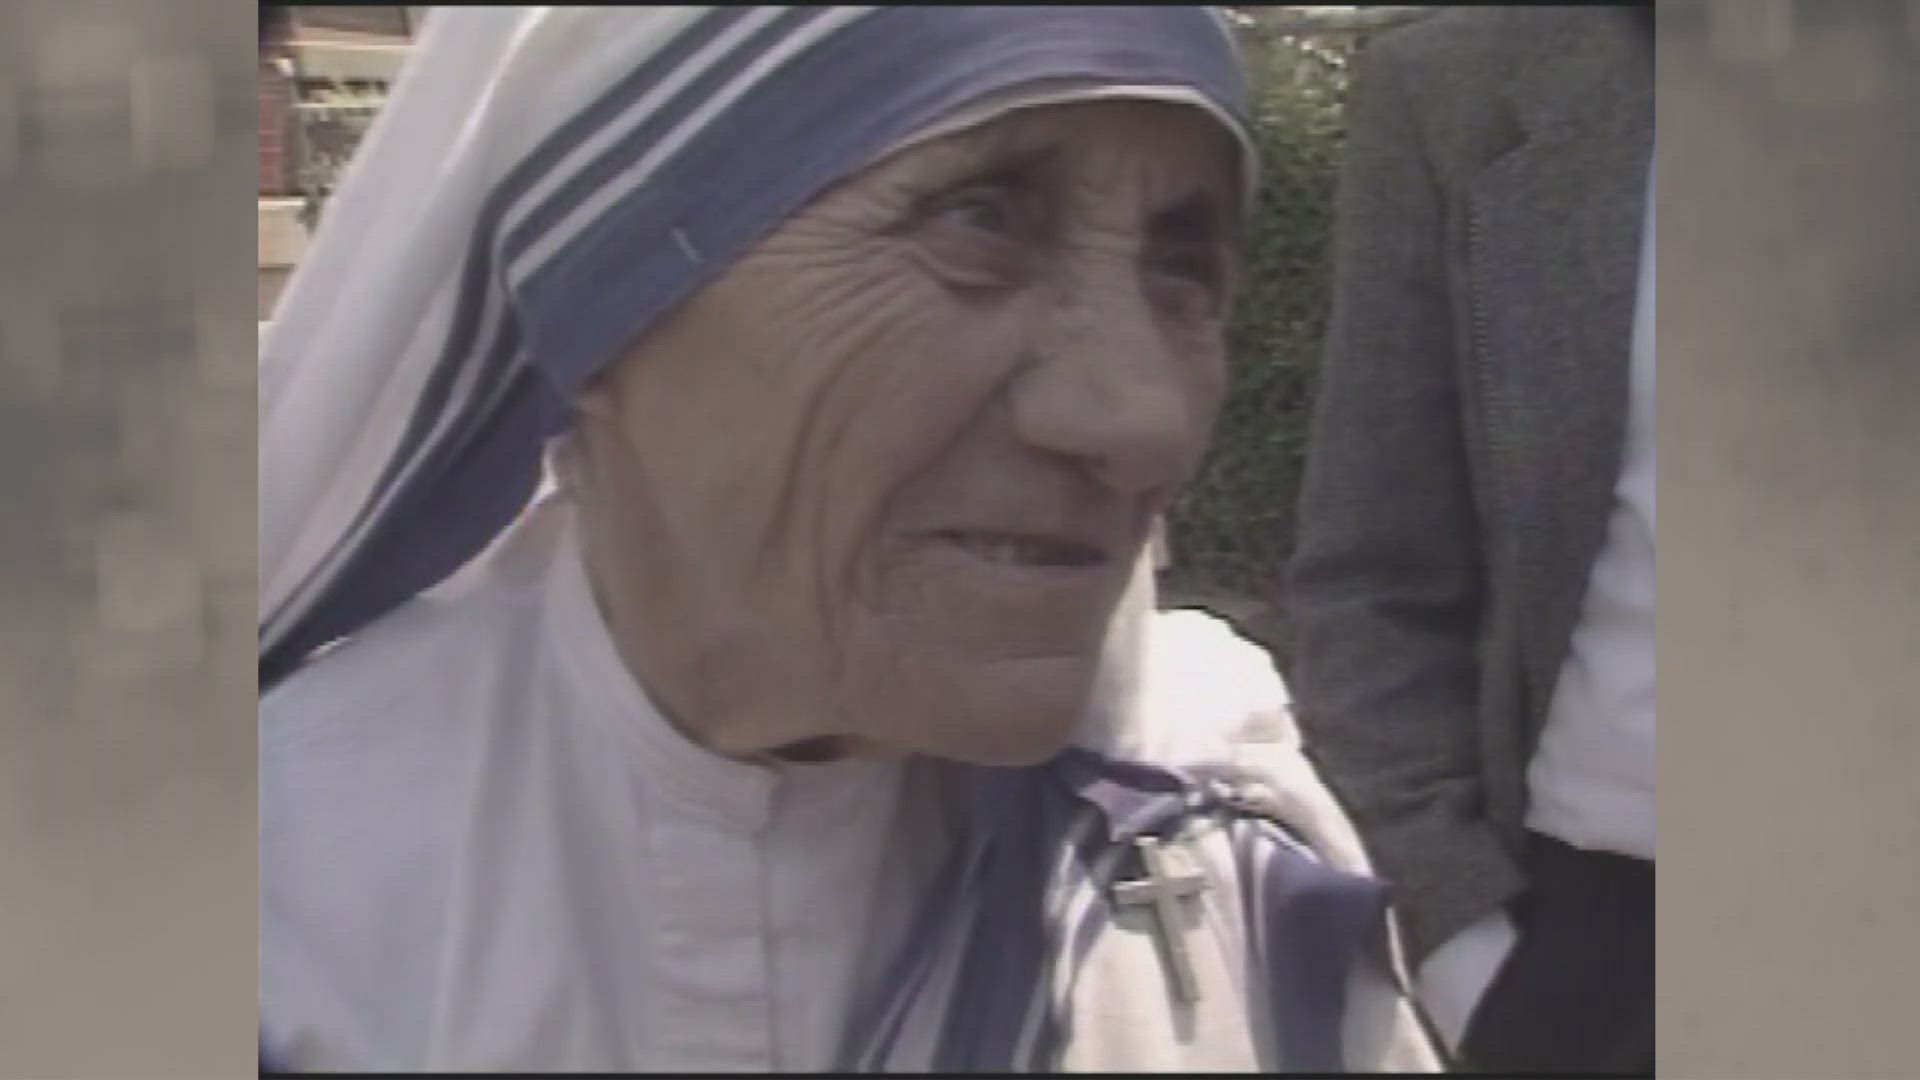 Vintage KSDK goes back to the summer of 1988, when Mother Teresa of Calcutta, India, visited the St. Louis chapter of her Missionaries of Charity.